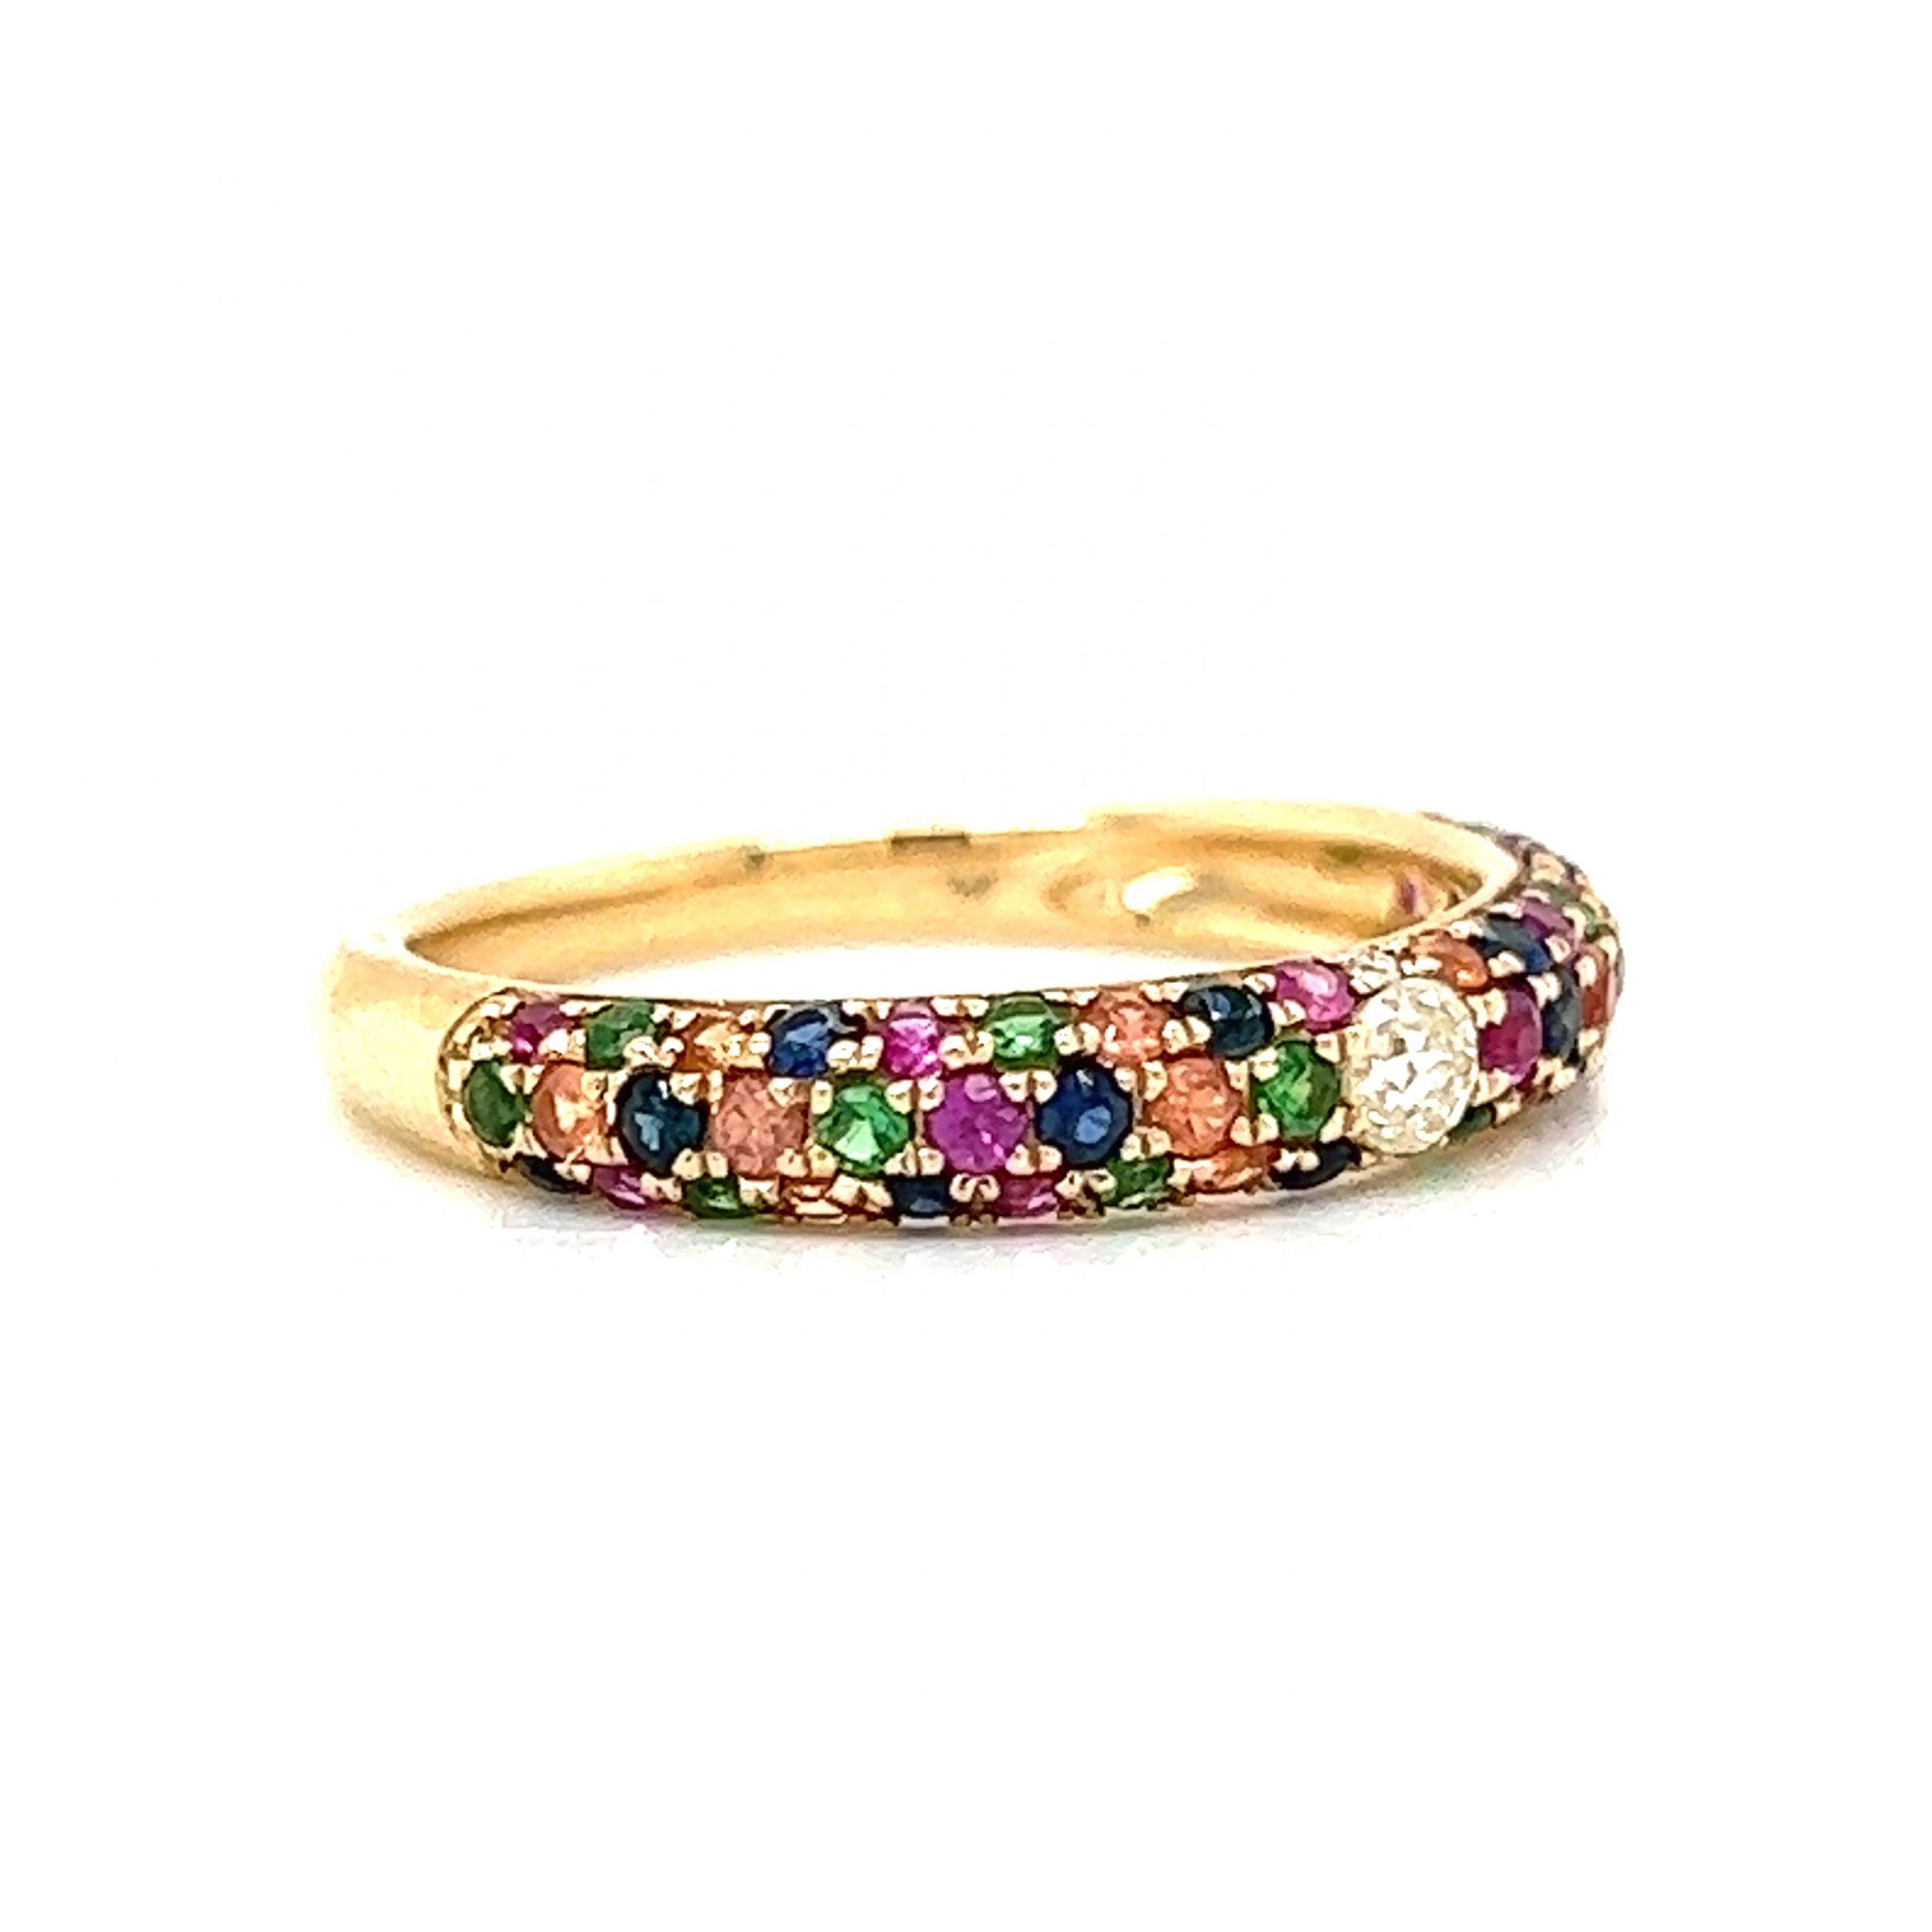 Multicolor Sapphire & Diamond Band in 14k Yellow GoldComposition: 14 Karat Yellow GoldRing Size: 6.5Total Diamond Weight: .12 ctTotal Gram Weight: 2.3 gInscription: 14k CS.11 SS.01 SO.80